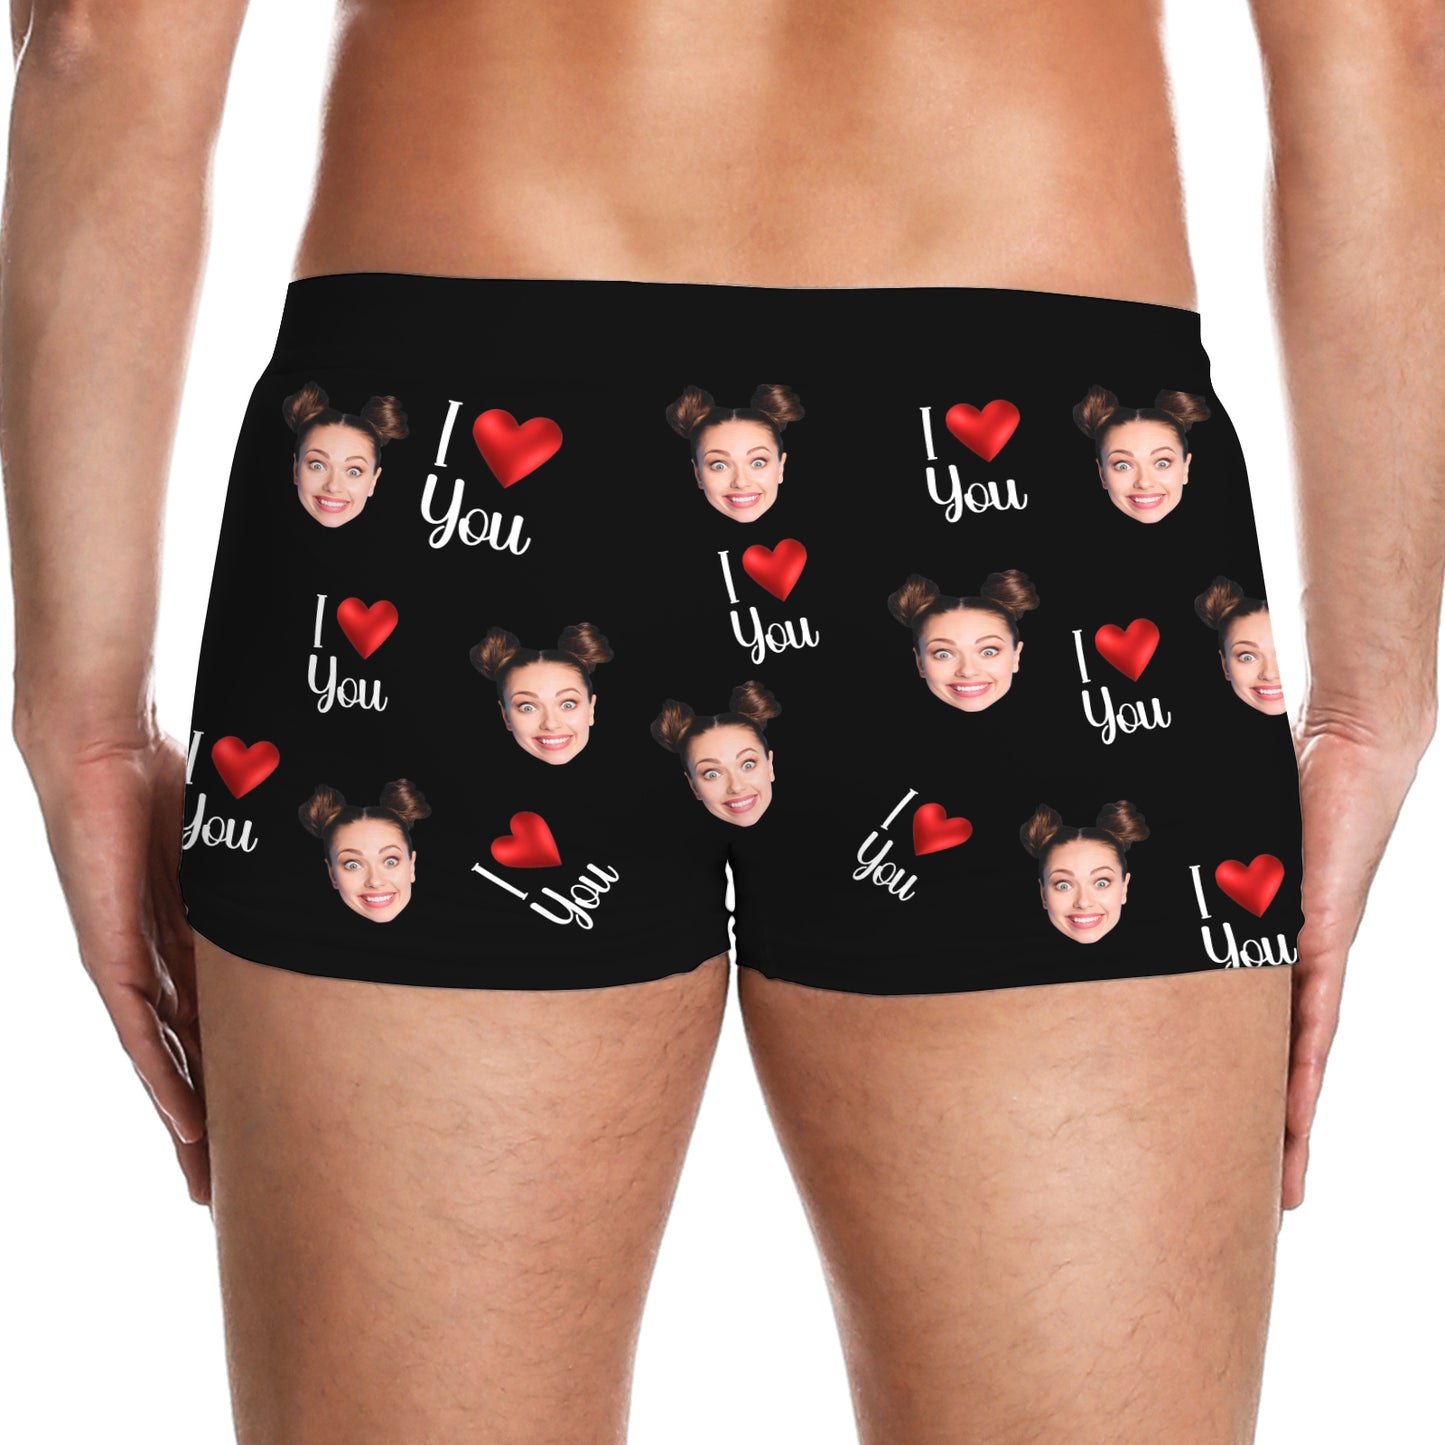 Couple - Property Of Girlfriends - Personalized Photo Men's Boxer